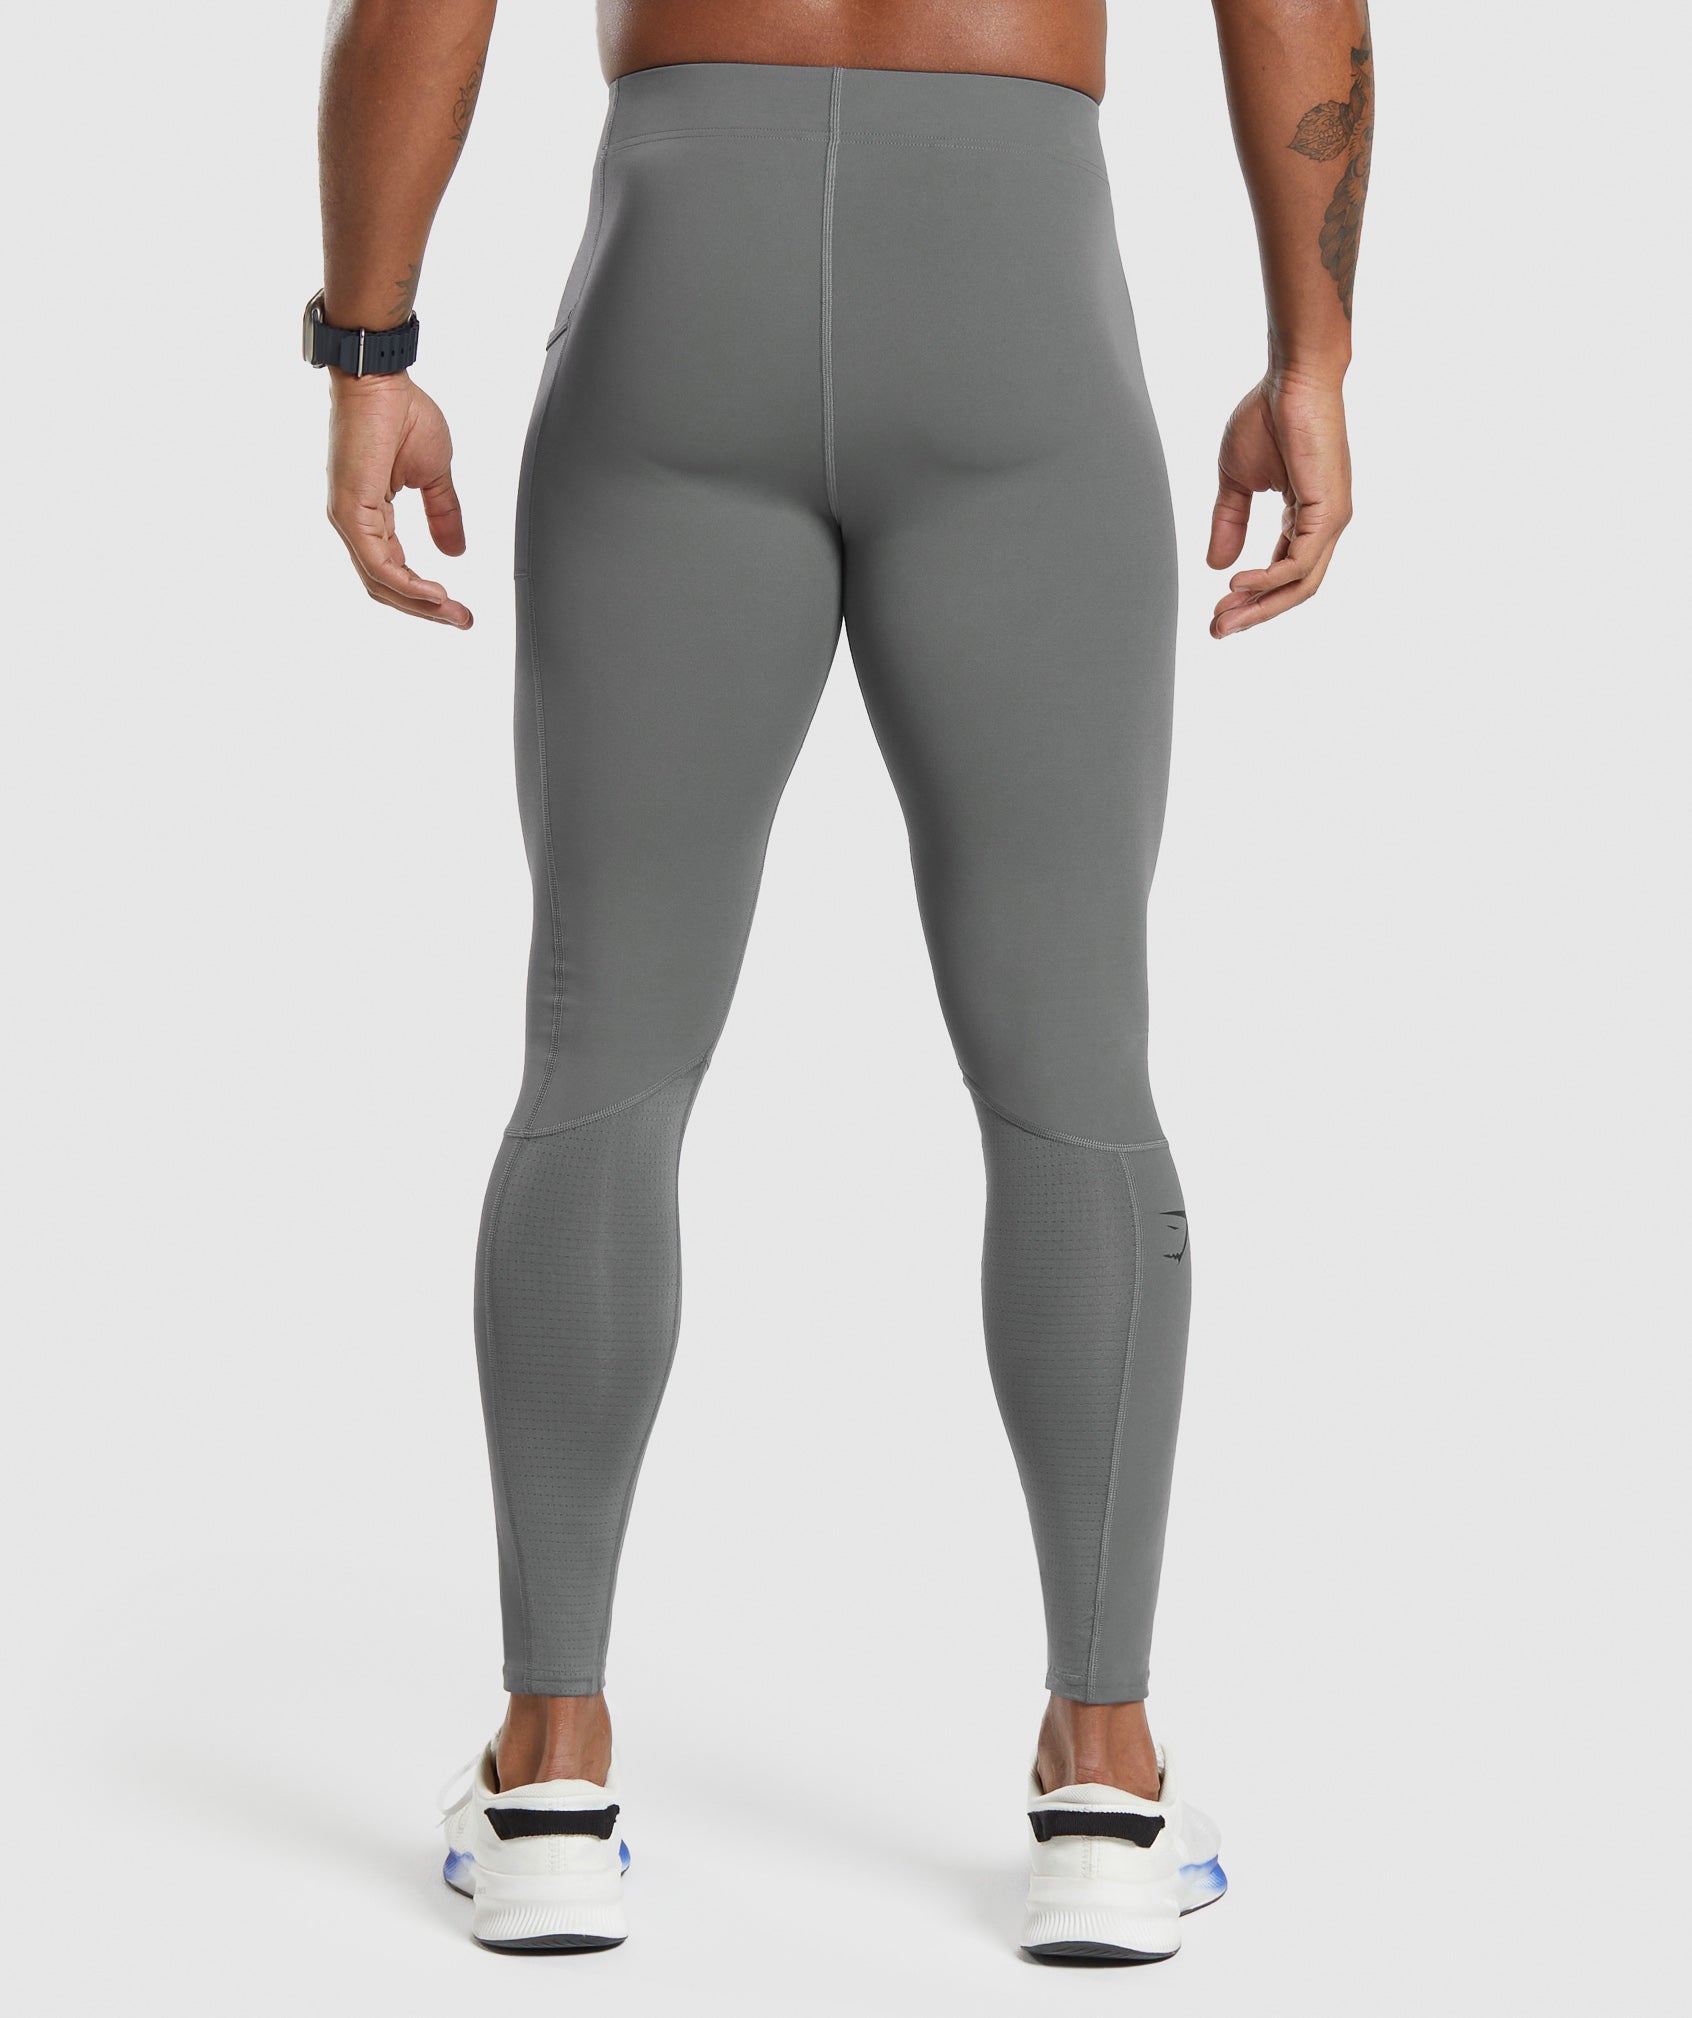 Control Baselayer Legging in Pitch Grey - view 2